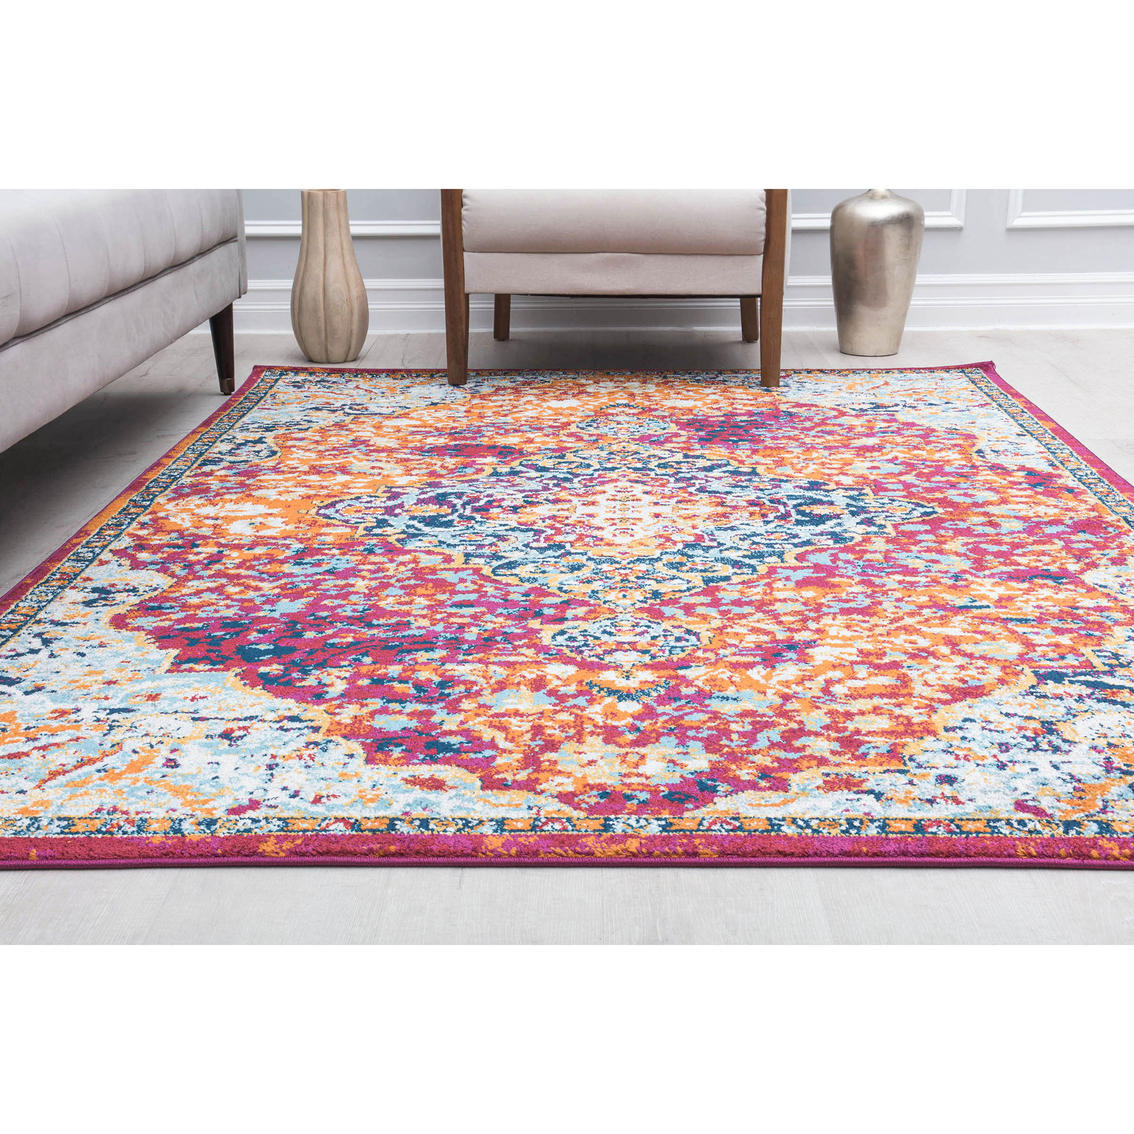 Rugs America Harper Rosy Peach Abstract Vintage Area Rug - Image 4 of 8